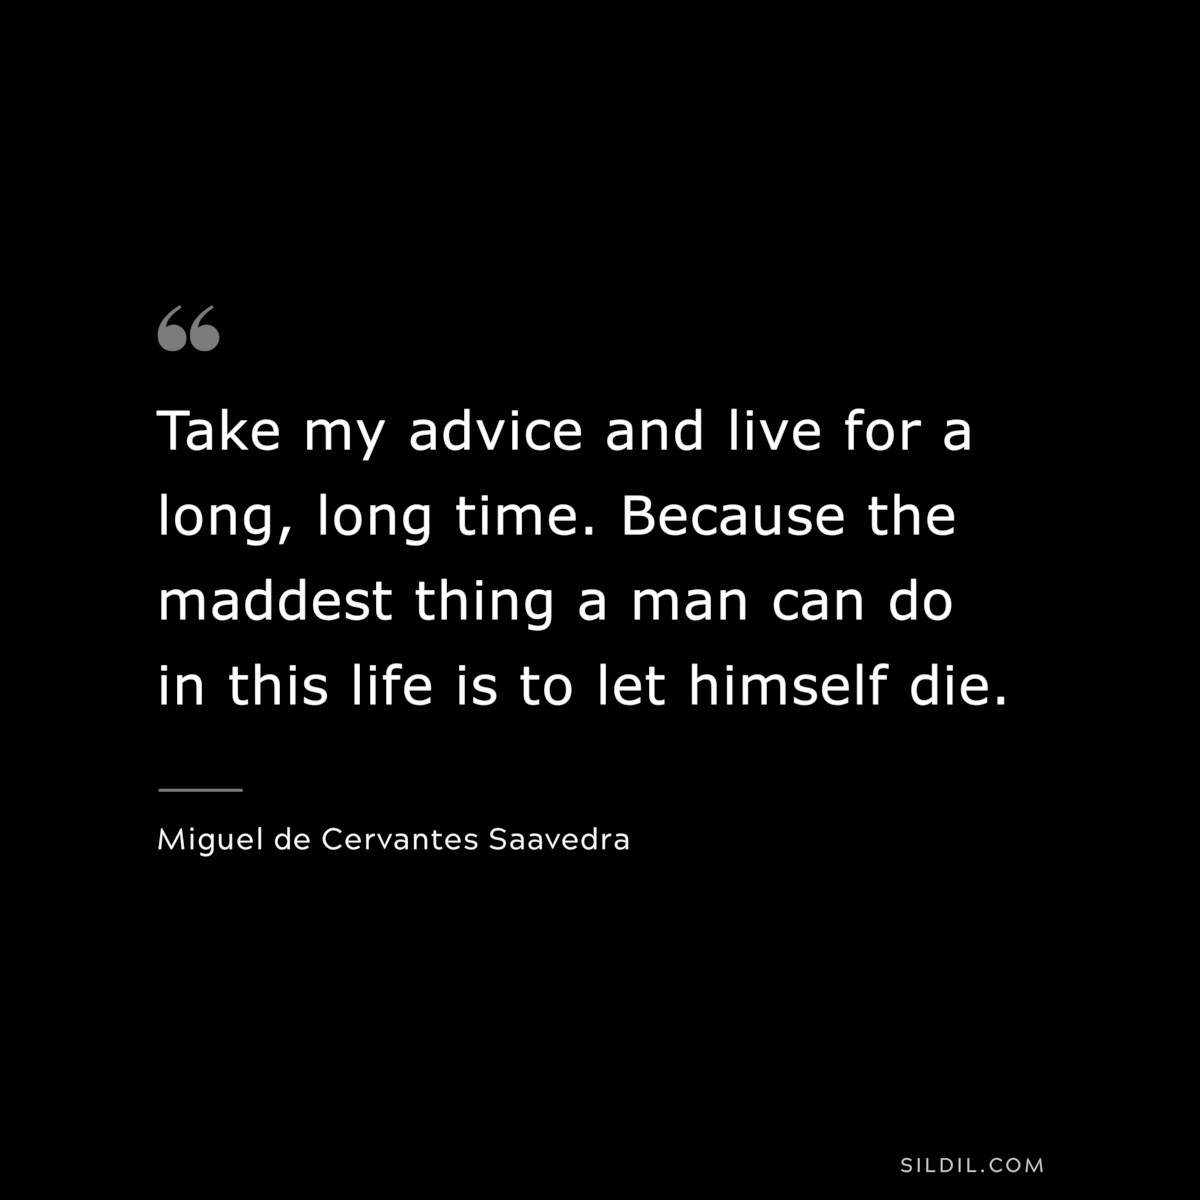 Take my advice and live for a long, long time. Because the maddest thing a man can do in this life is to let himself die. ― Miguel de Cervantes Saavedra